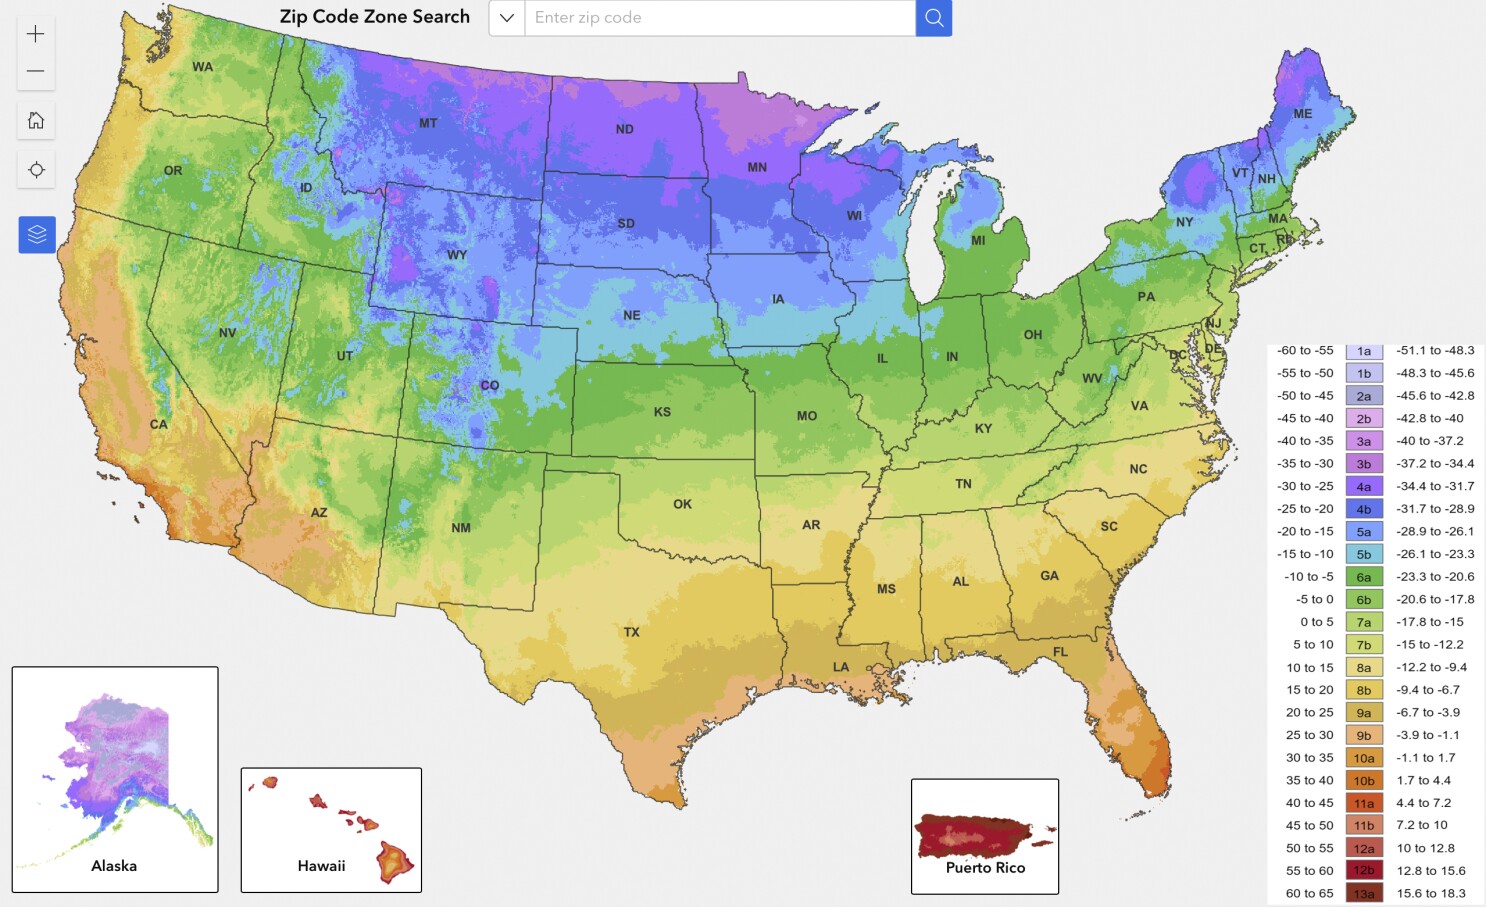 Don't Let Winter Kill Your Plants. Follow Your USDA Hardiness Zone - CNET